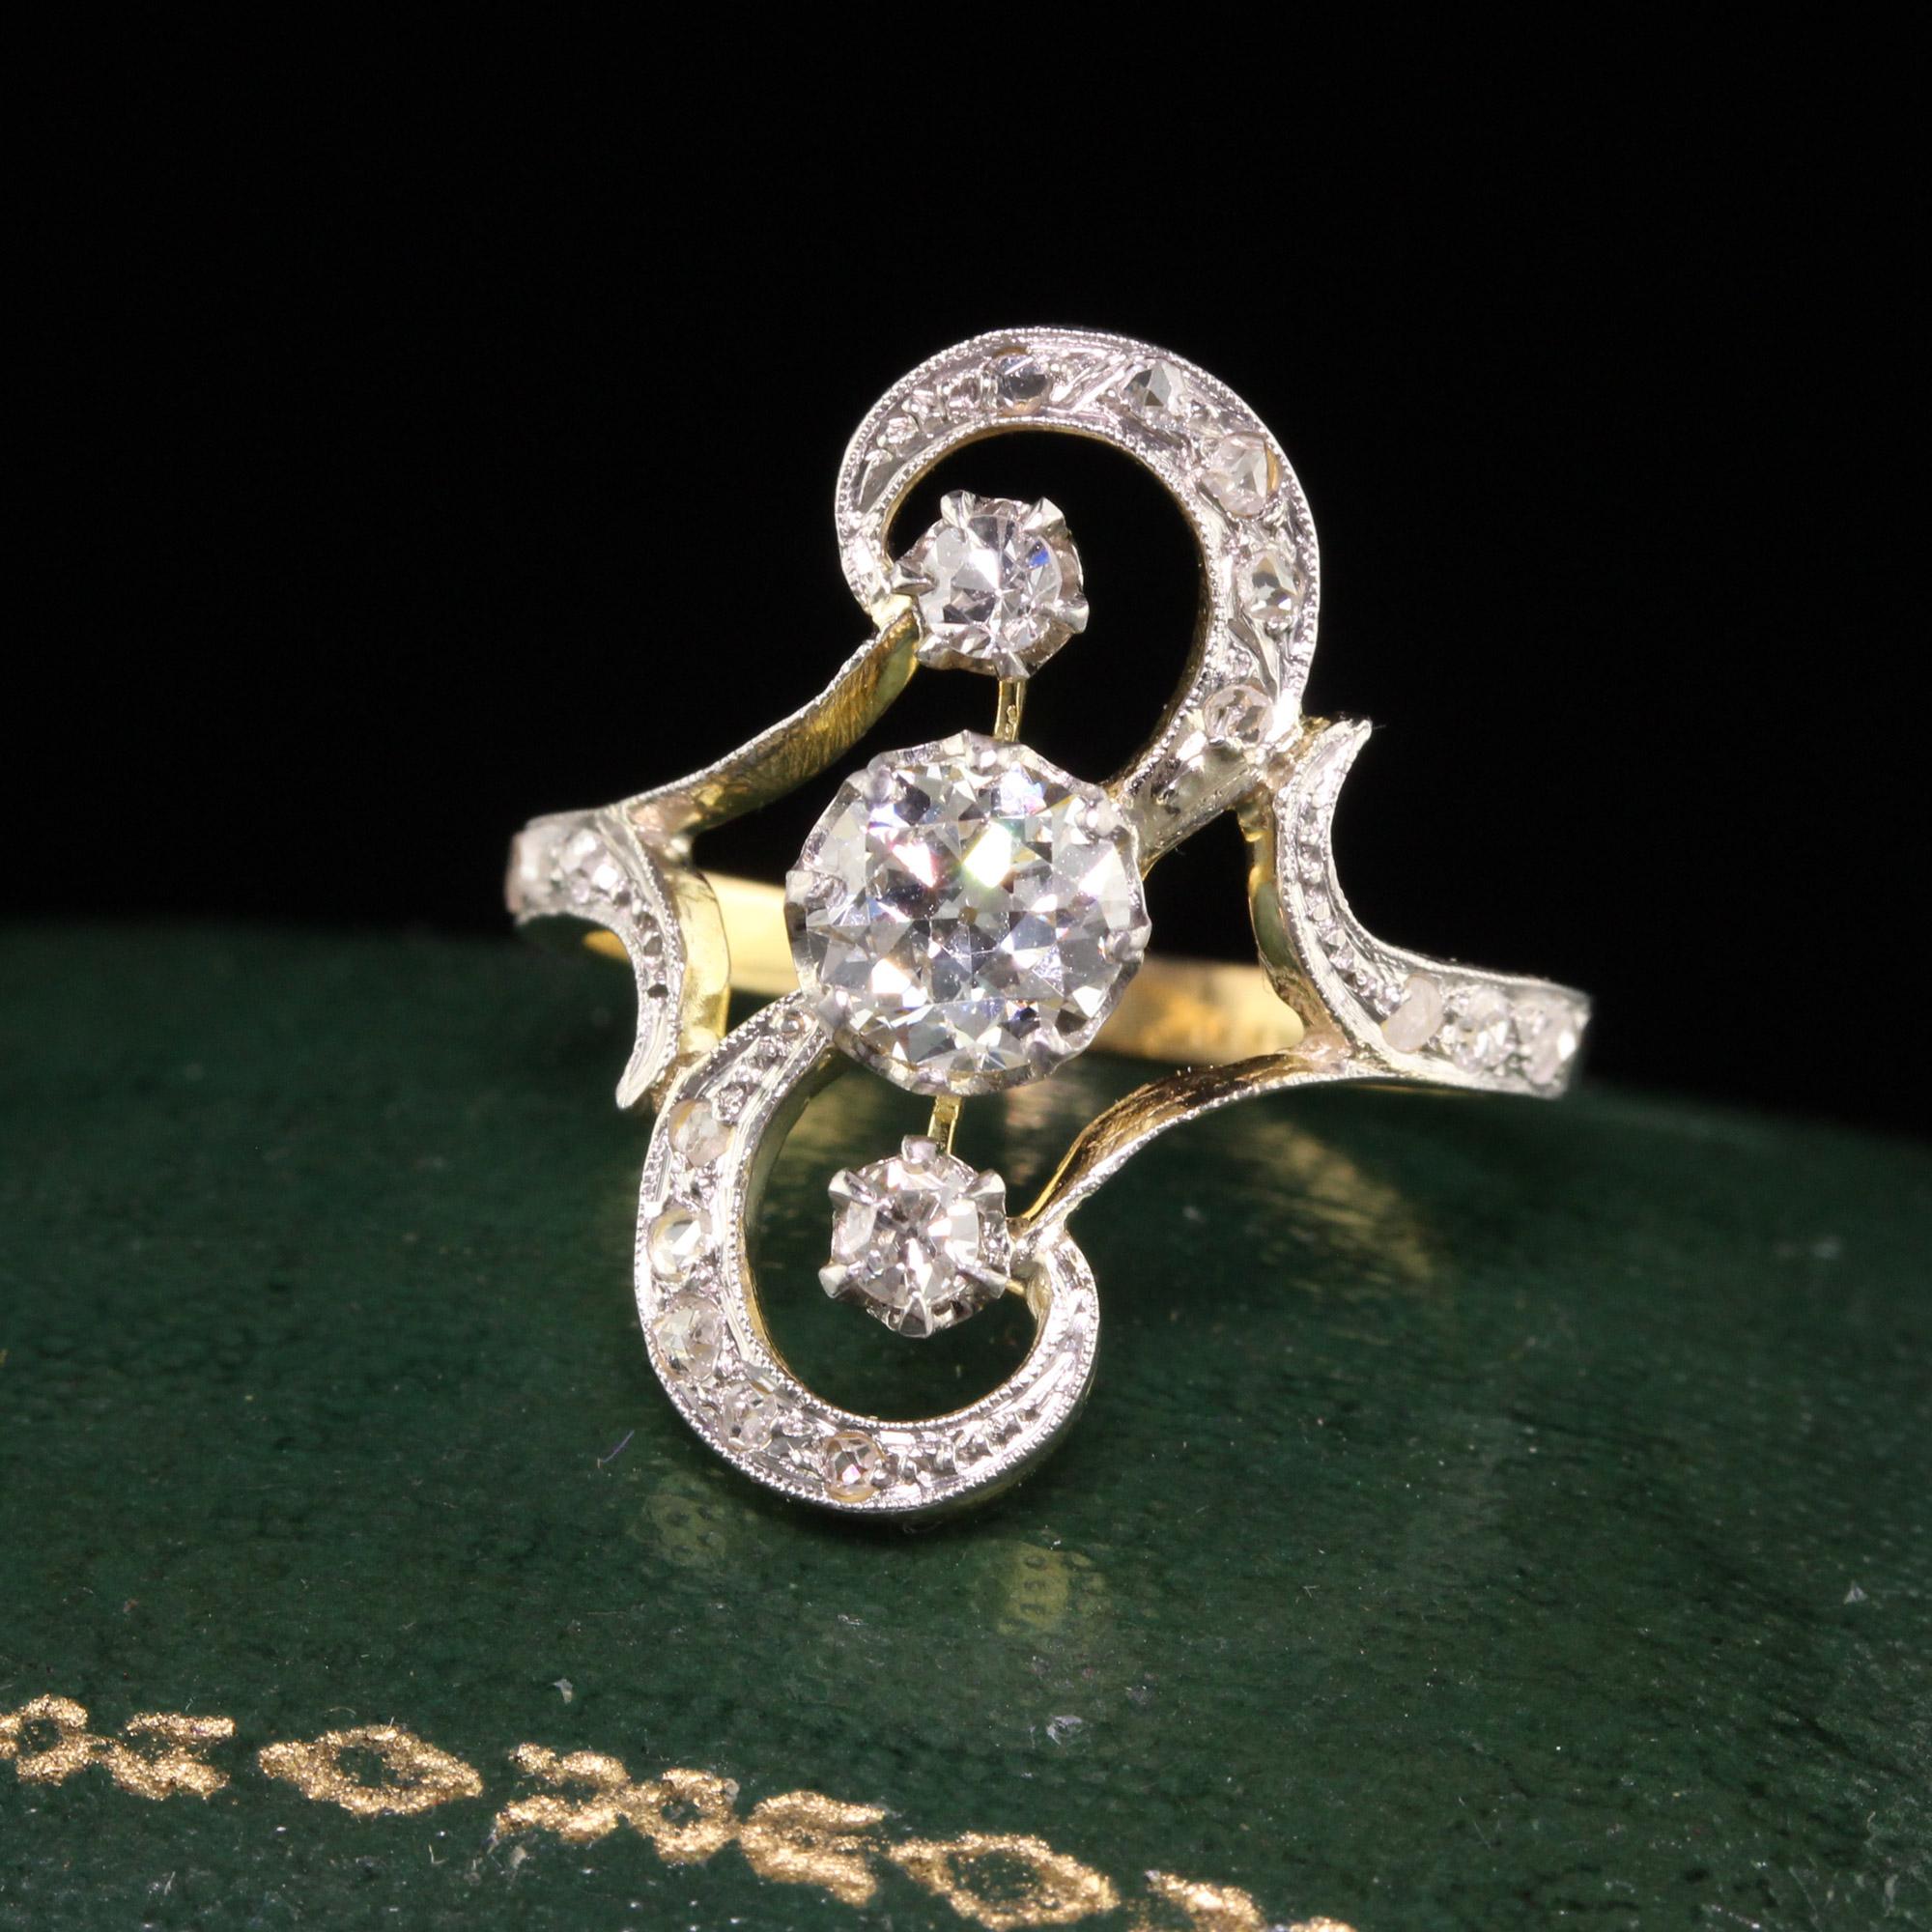 Beautiful Antique Edwardian French 18K Yellow Gold Platinum Top Old Euro Diamond Ring. This gorgeous ring is crafted in 18k yellow gold and platinum top. The center holds a old european diamond. There are old mine and rose cut diamonds on the